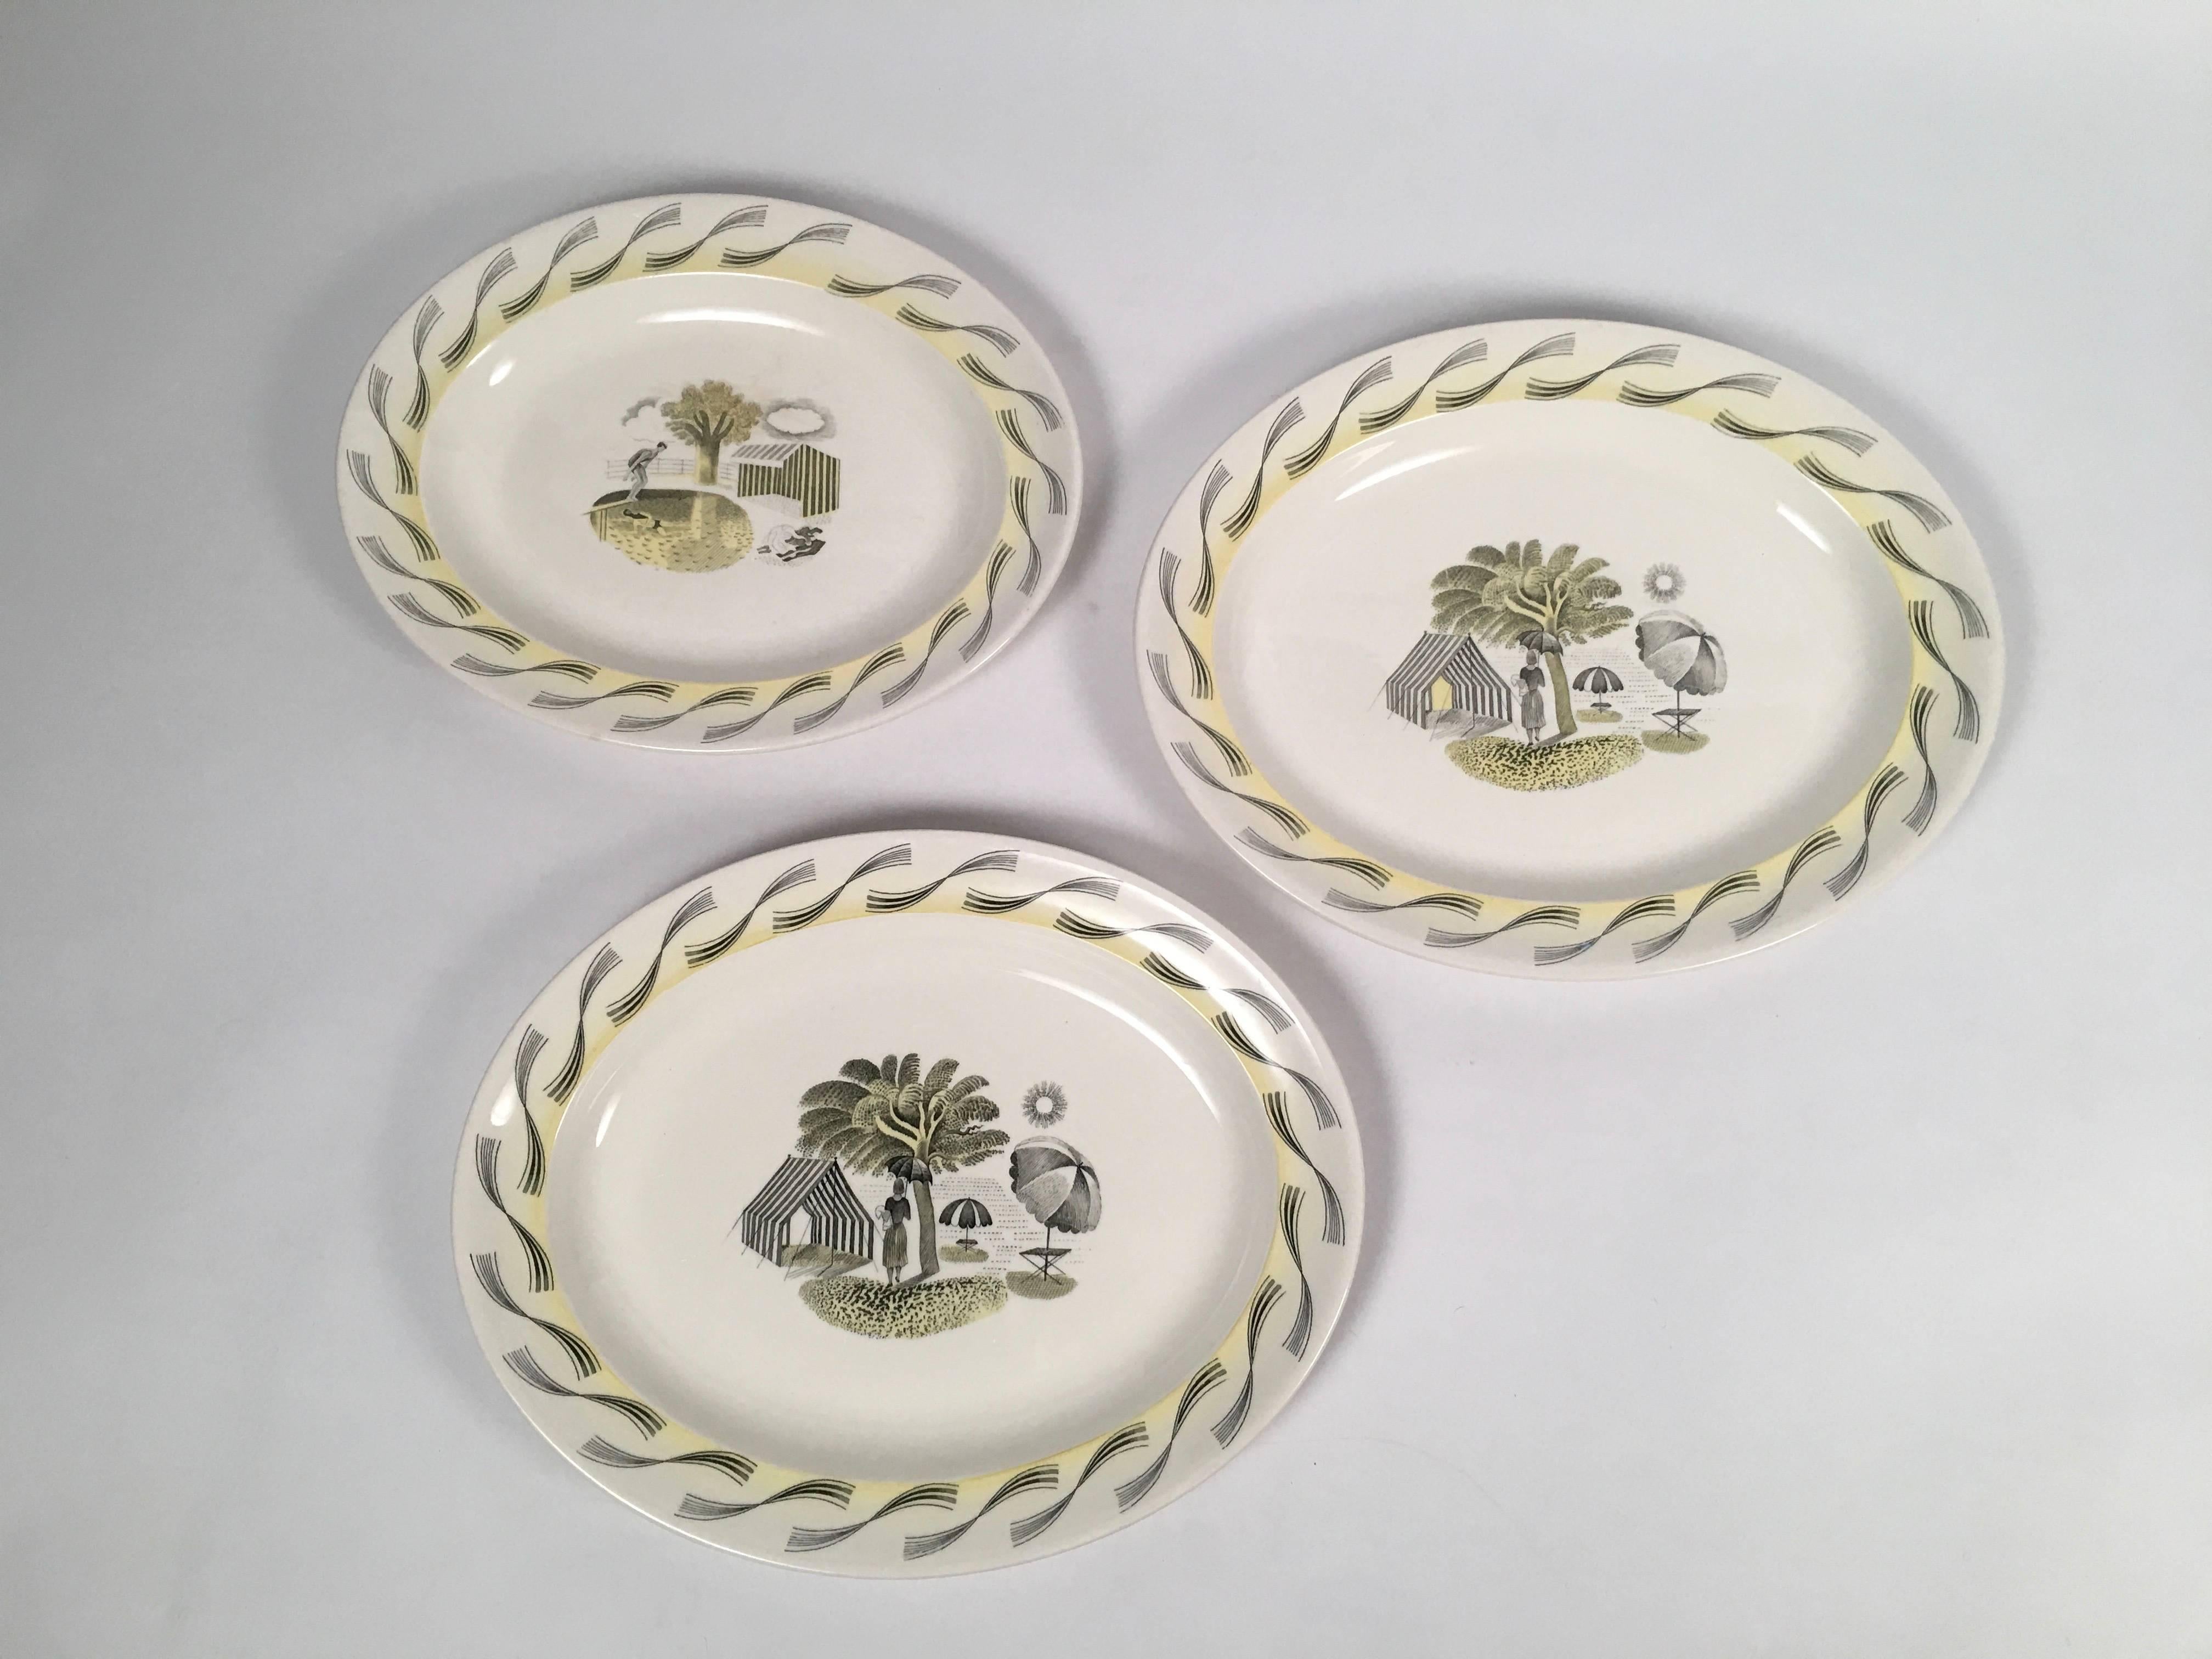 Hand-Painted Eric Ravilious Wedgwood Garden Series Oval Platter with Woman and Umbrellas